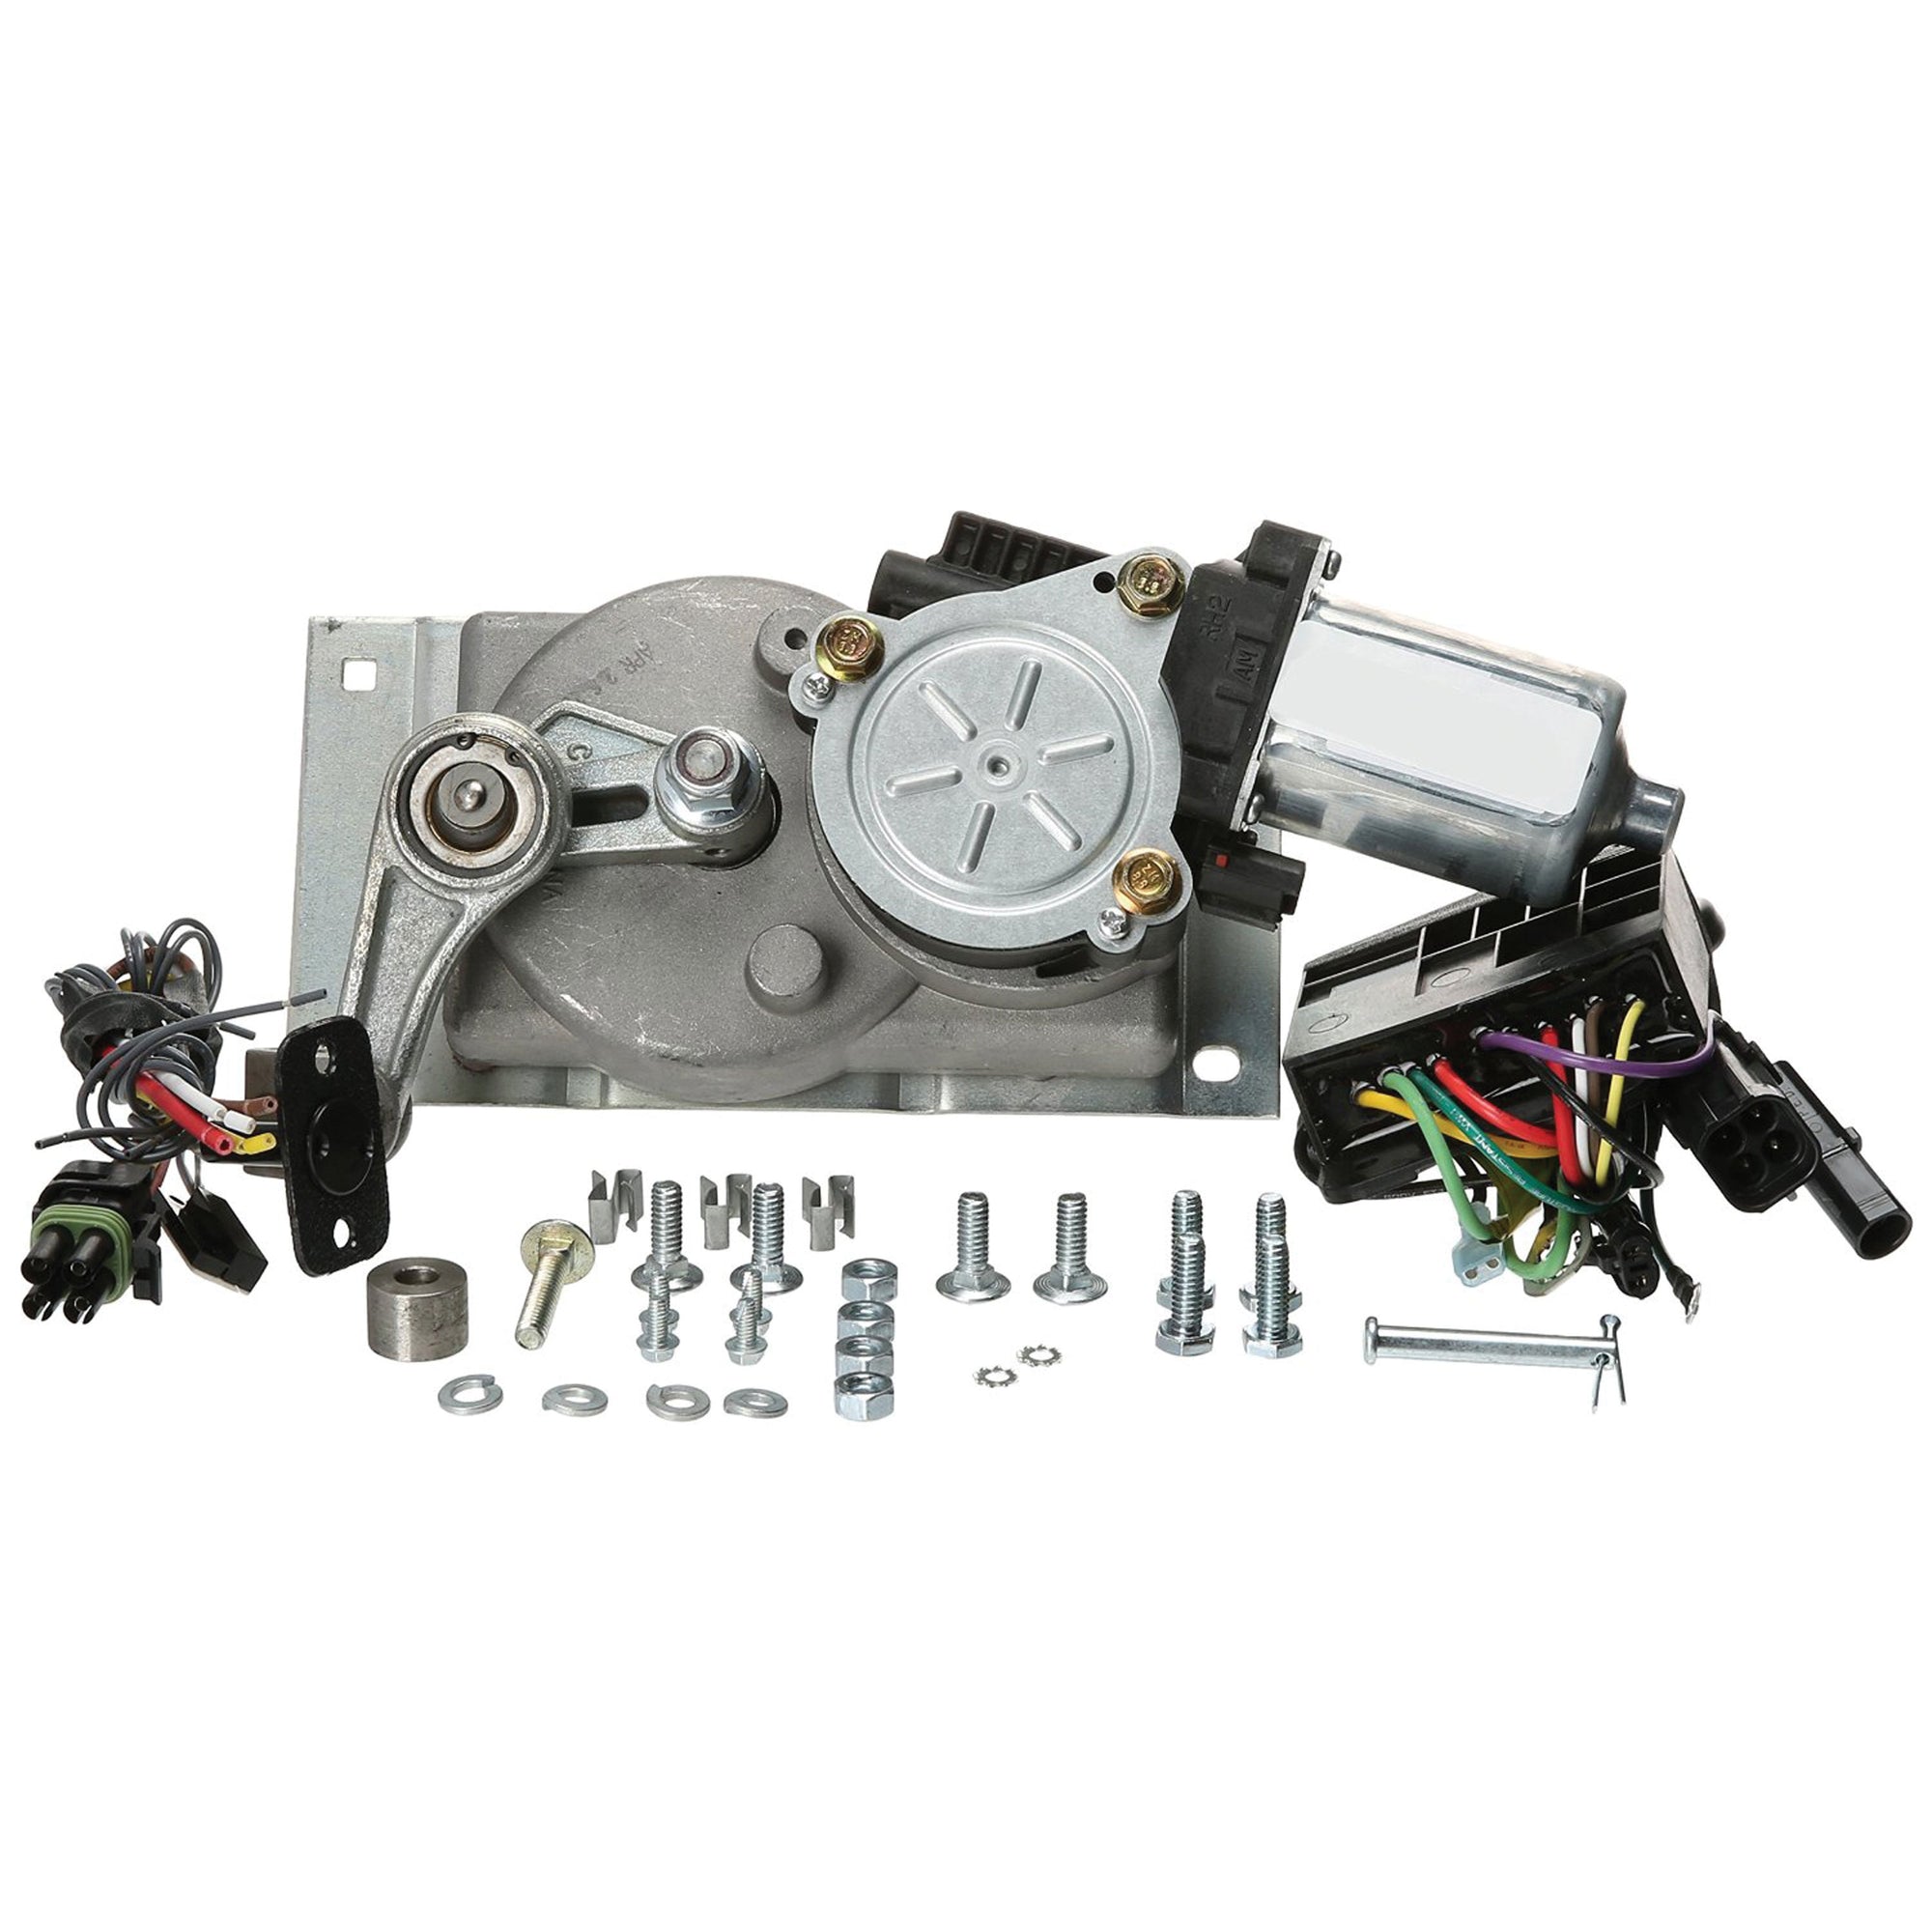 Lippert 379801 Kwikee Replacement Kit for 26 Series IMGL/9510 Control